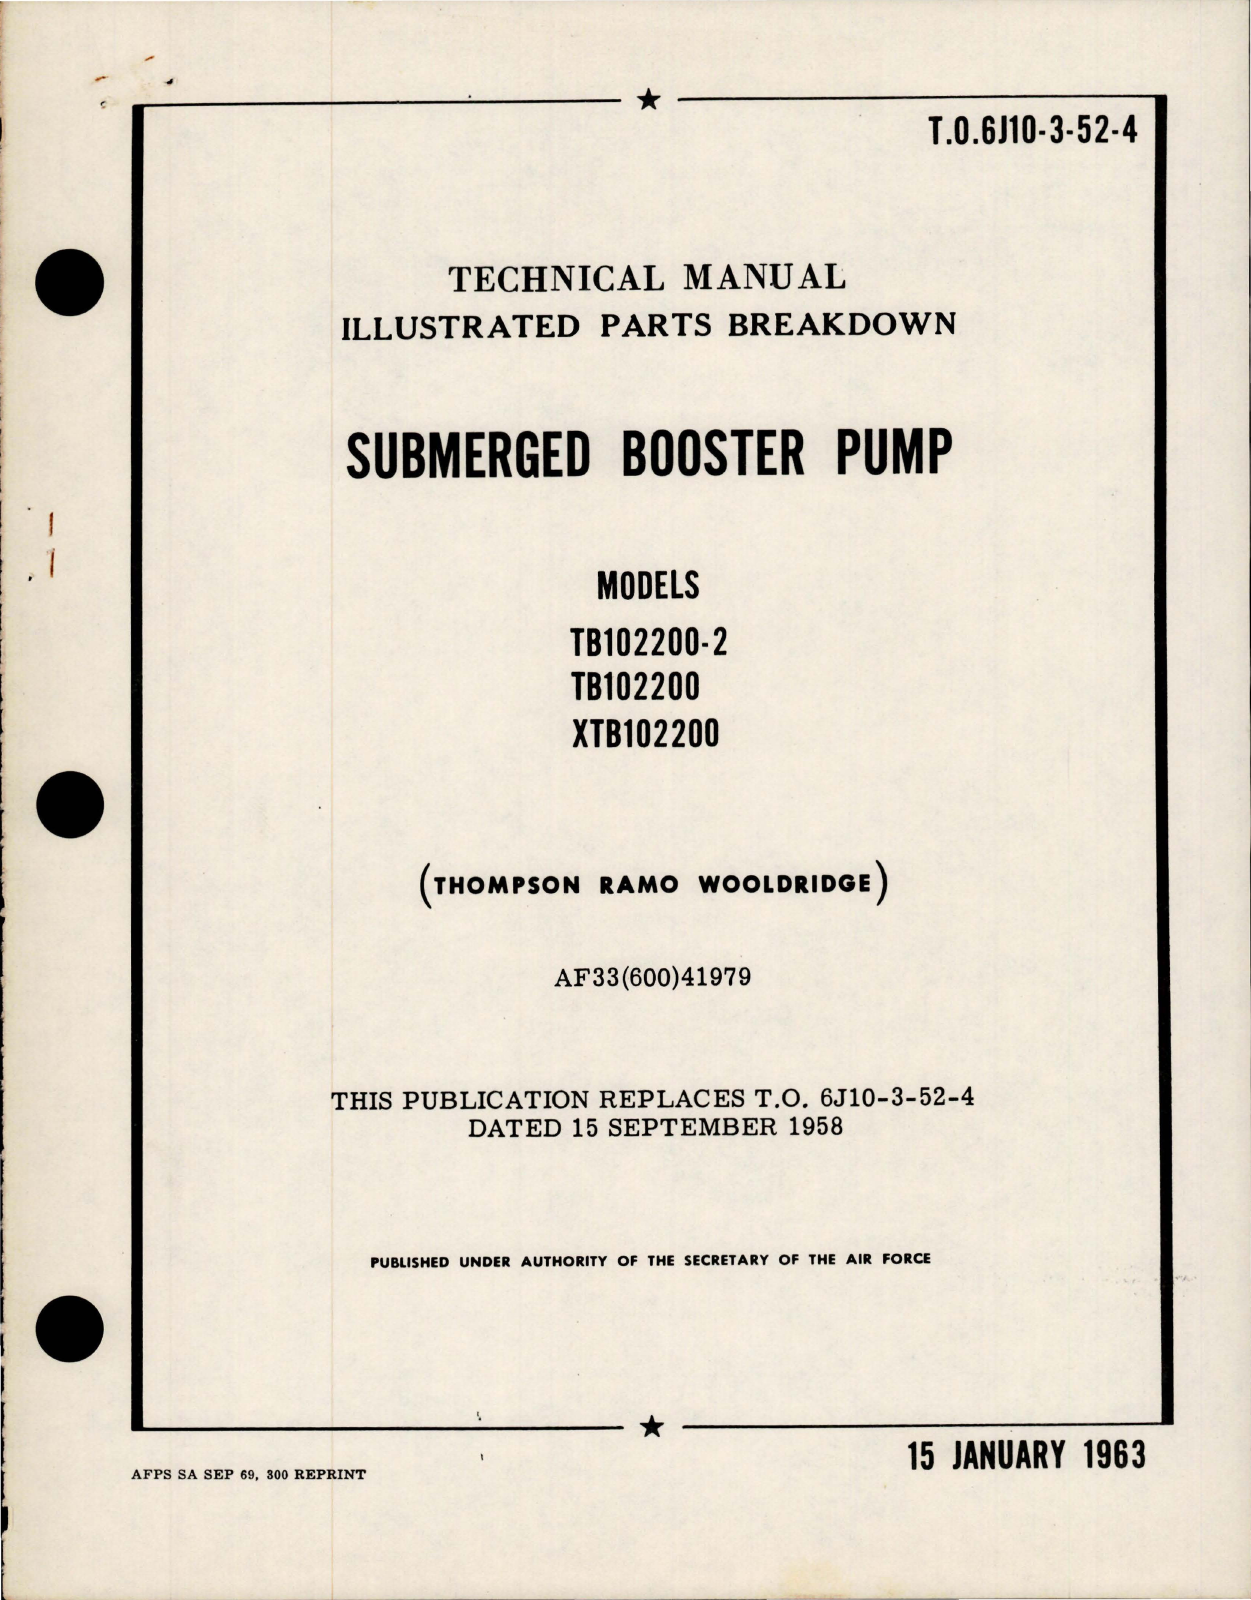 Sample page 1 from AirCorps Library document: Illustrated Parts Breakdown for Submerged Booster Pumps - Models TB102200-2, TB102200, XBT102200